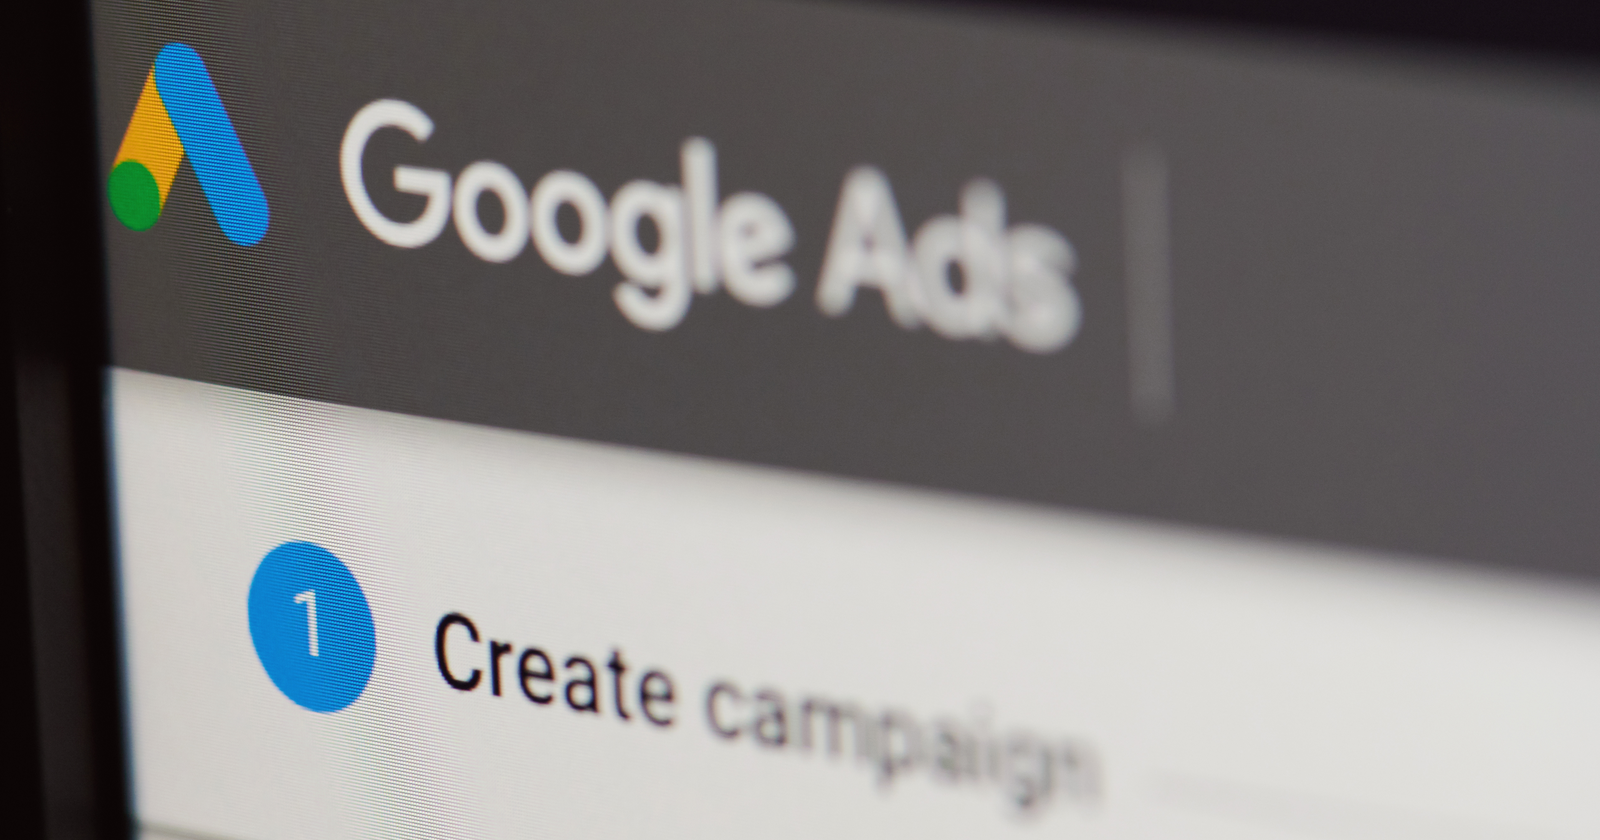 Google Shopping Ads: How To Set Them Up